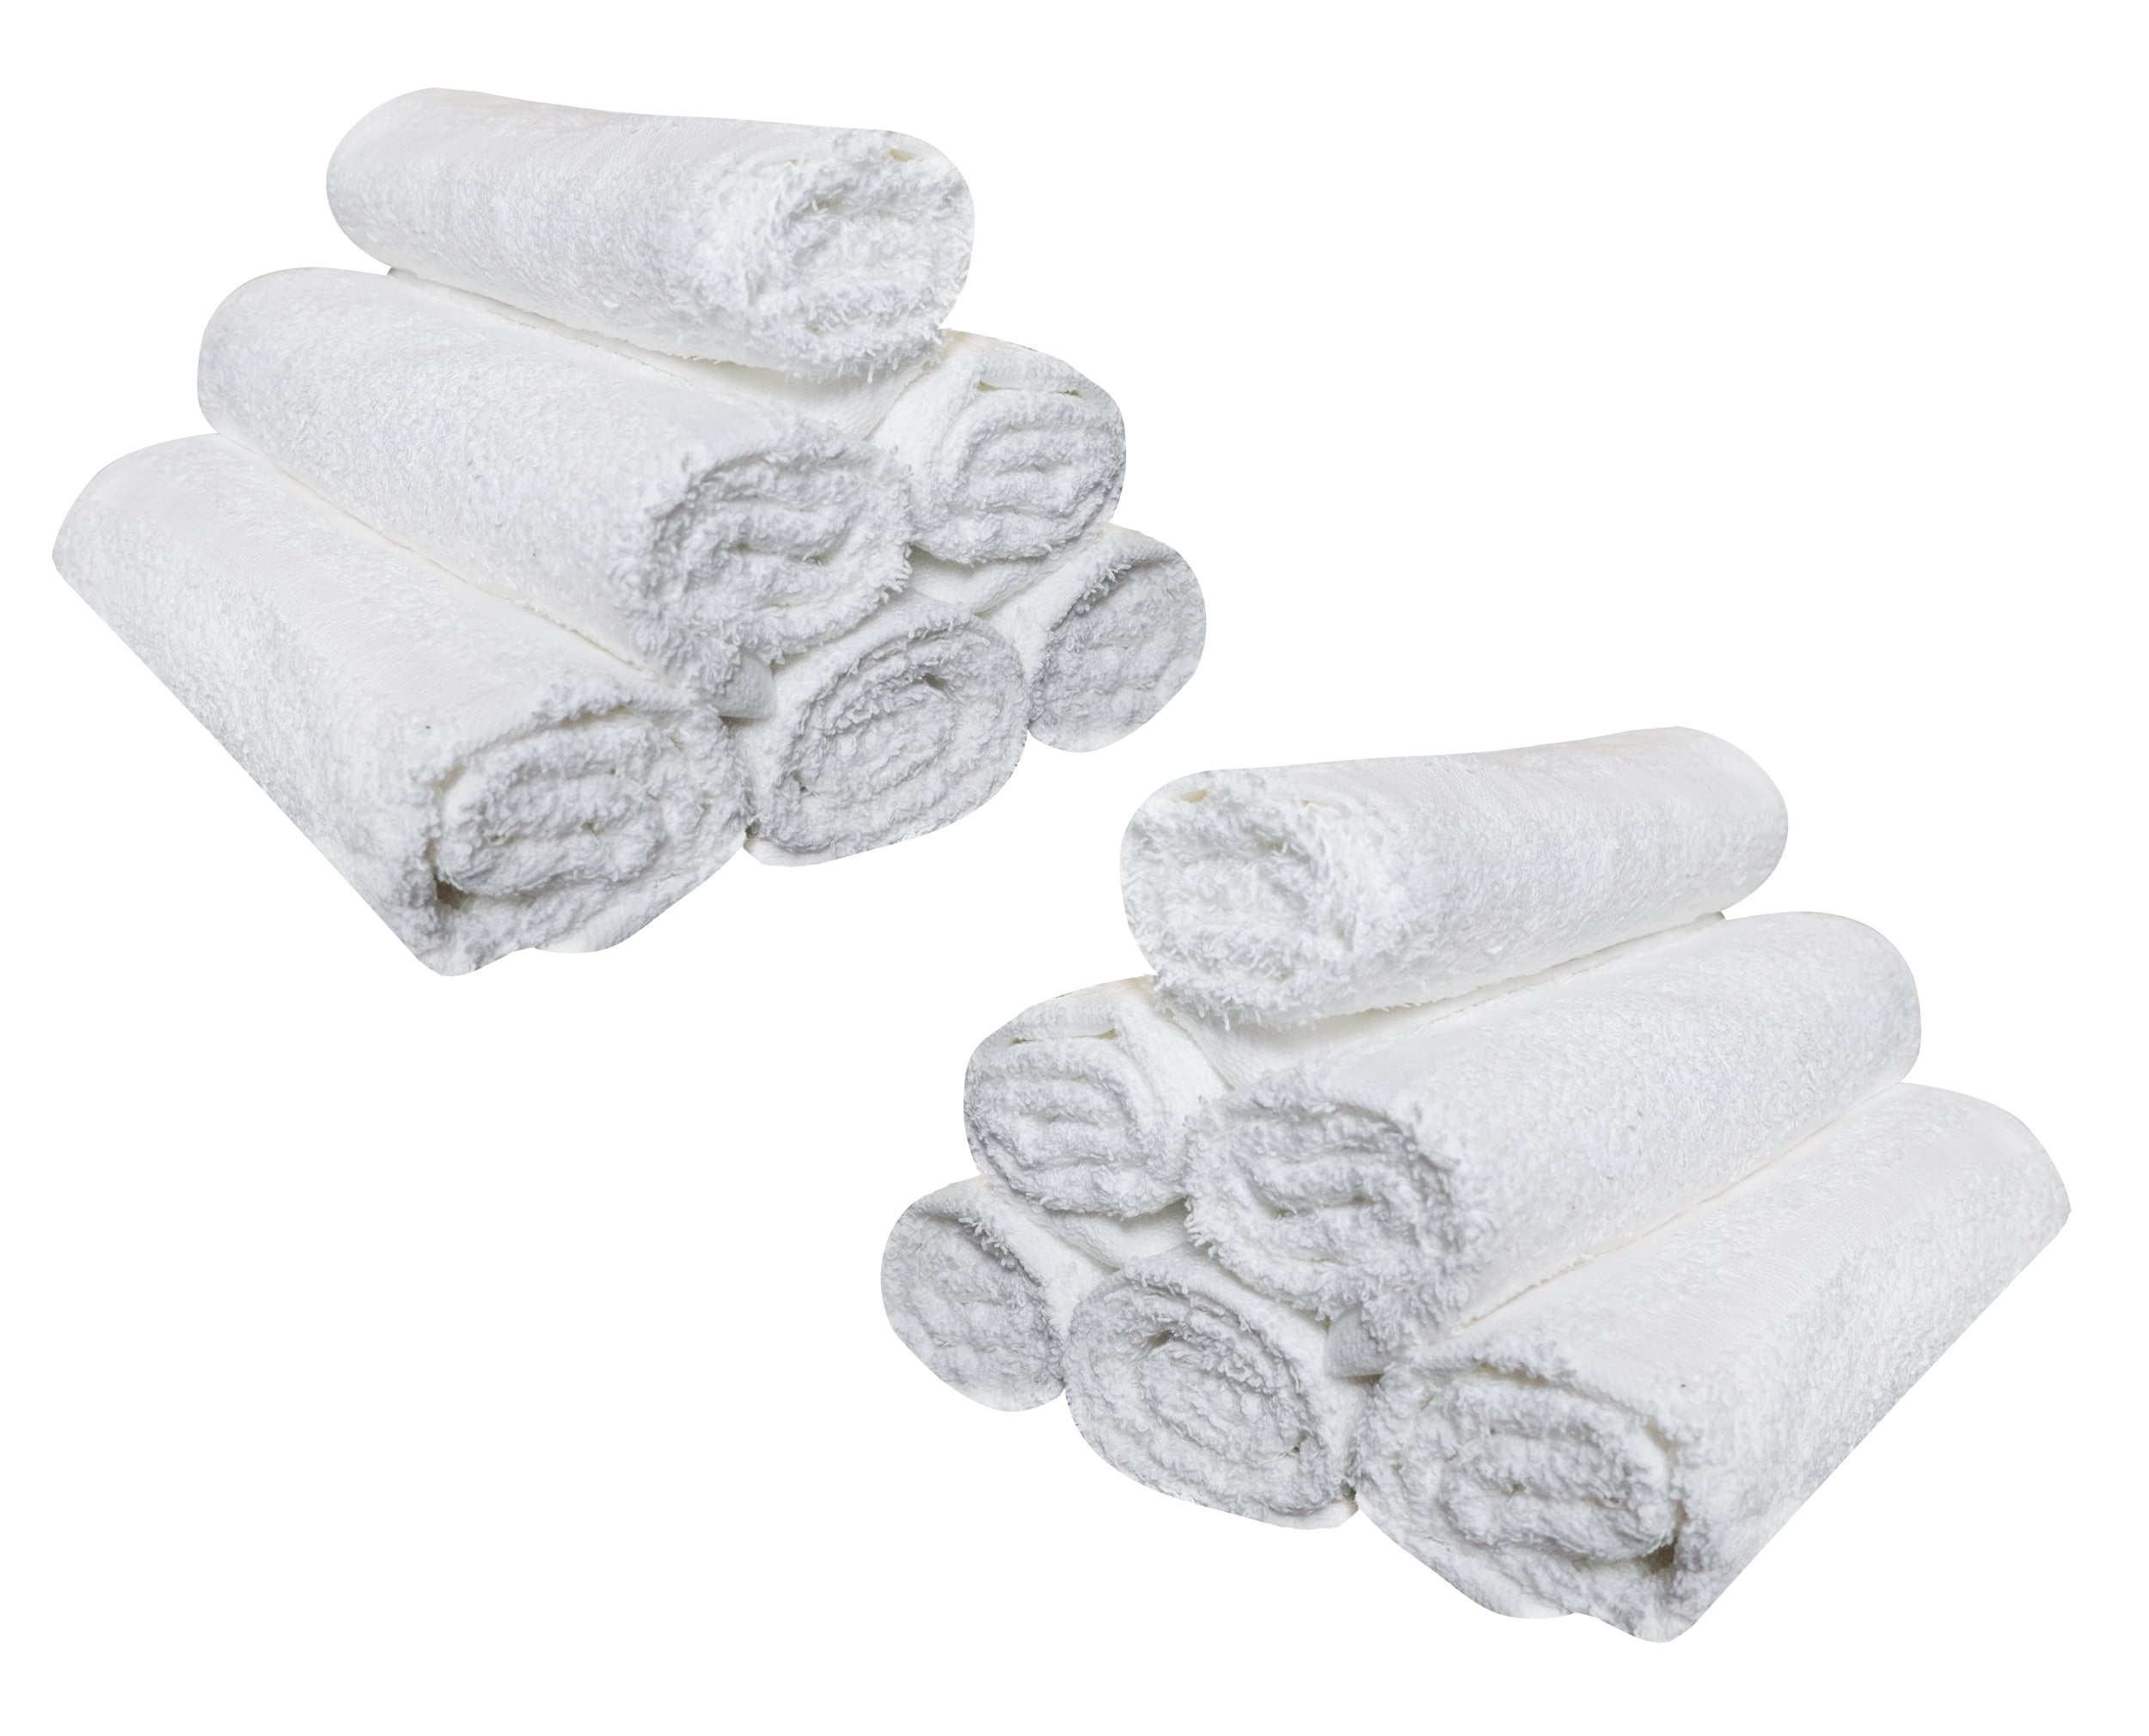  PRATIQUE 4 Pack Cute Hand Towels, Bathroom Towels with